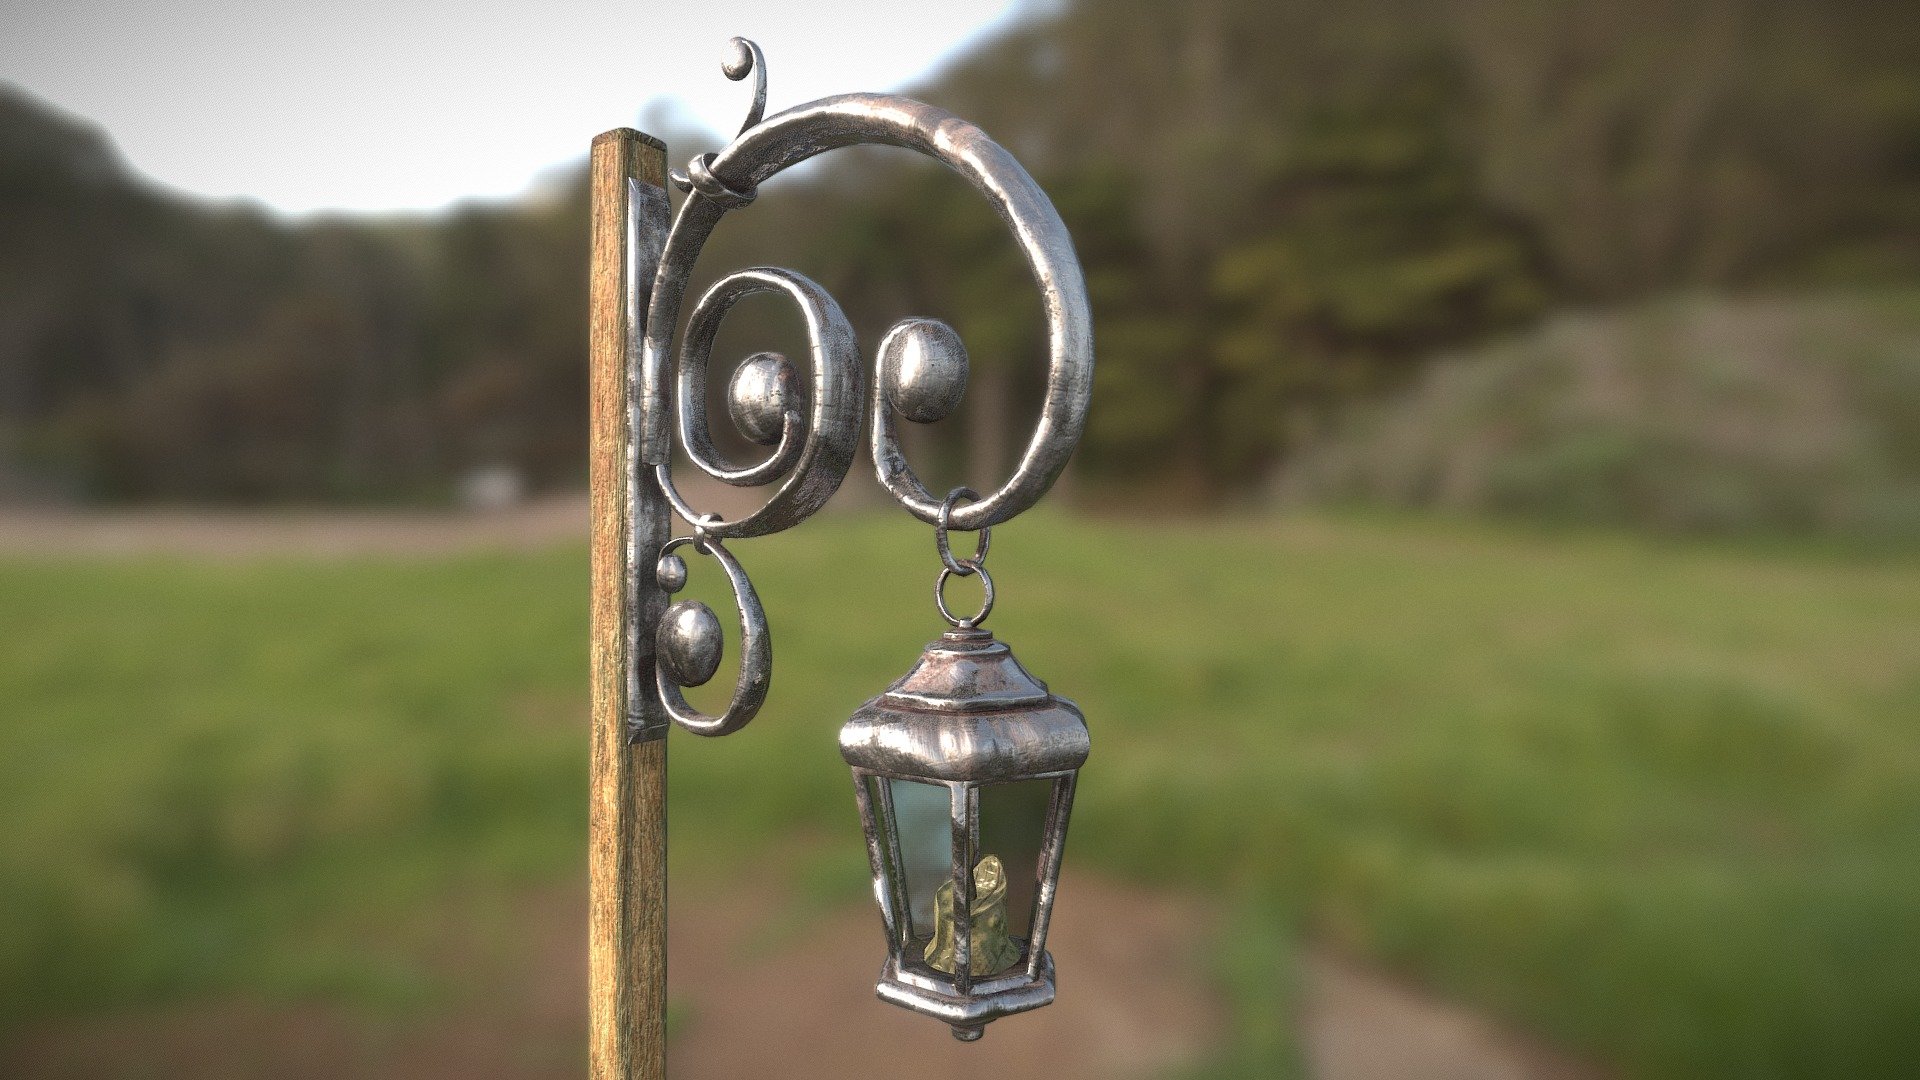 Stylized medieval street lantern for Unreal Engine 4 project. Also, please check my other works of sketchfab! - Stylized medieval street lantern - 3D model by NiceLookinGuy 3d model